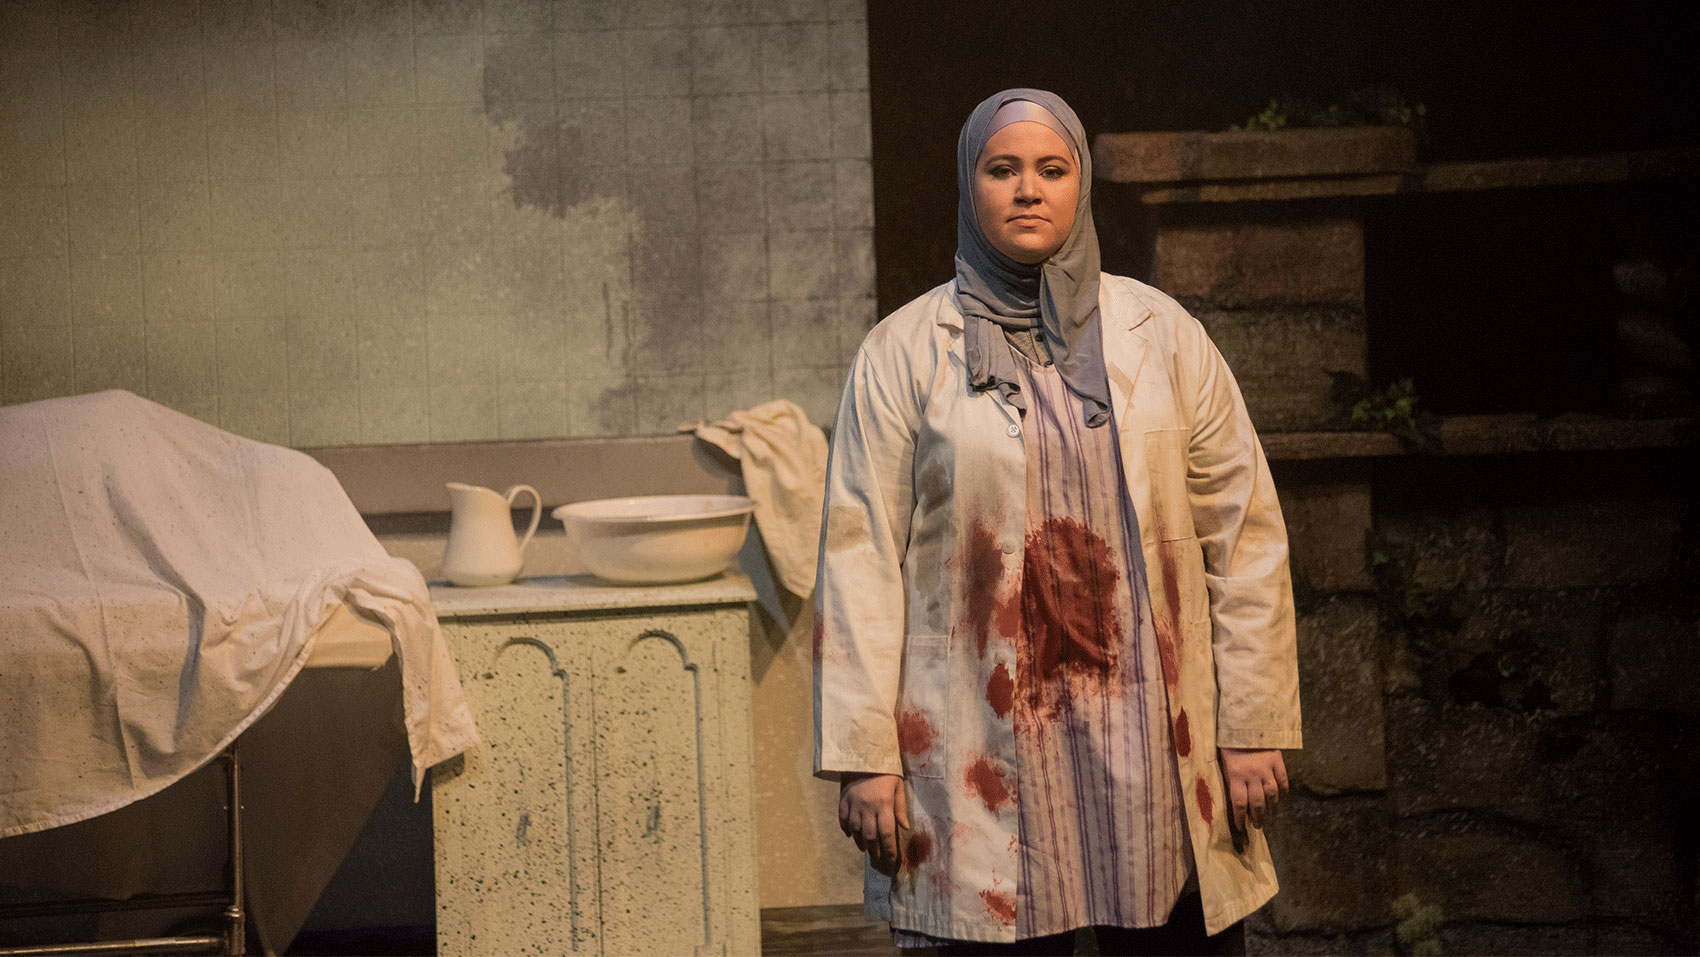 A woman in a hijab and white lab coat has blood soaked on her clothes, she has a somber expression on her face. 